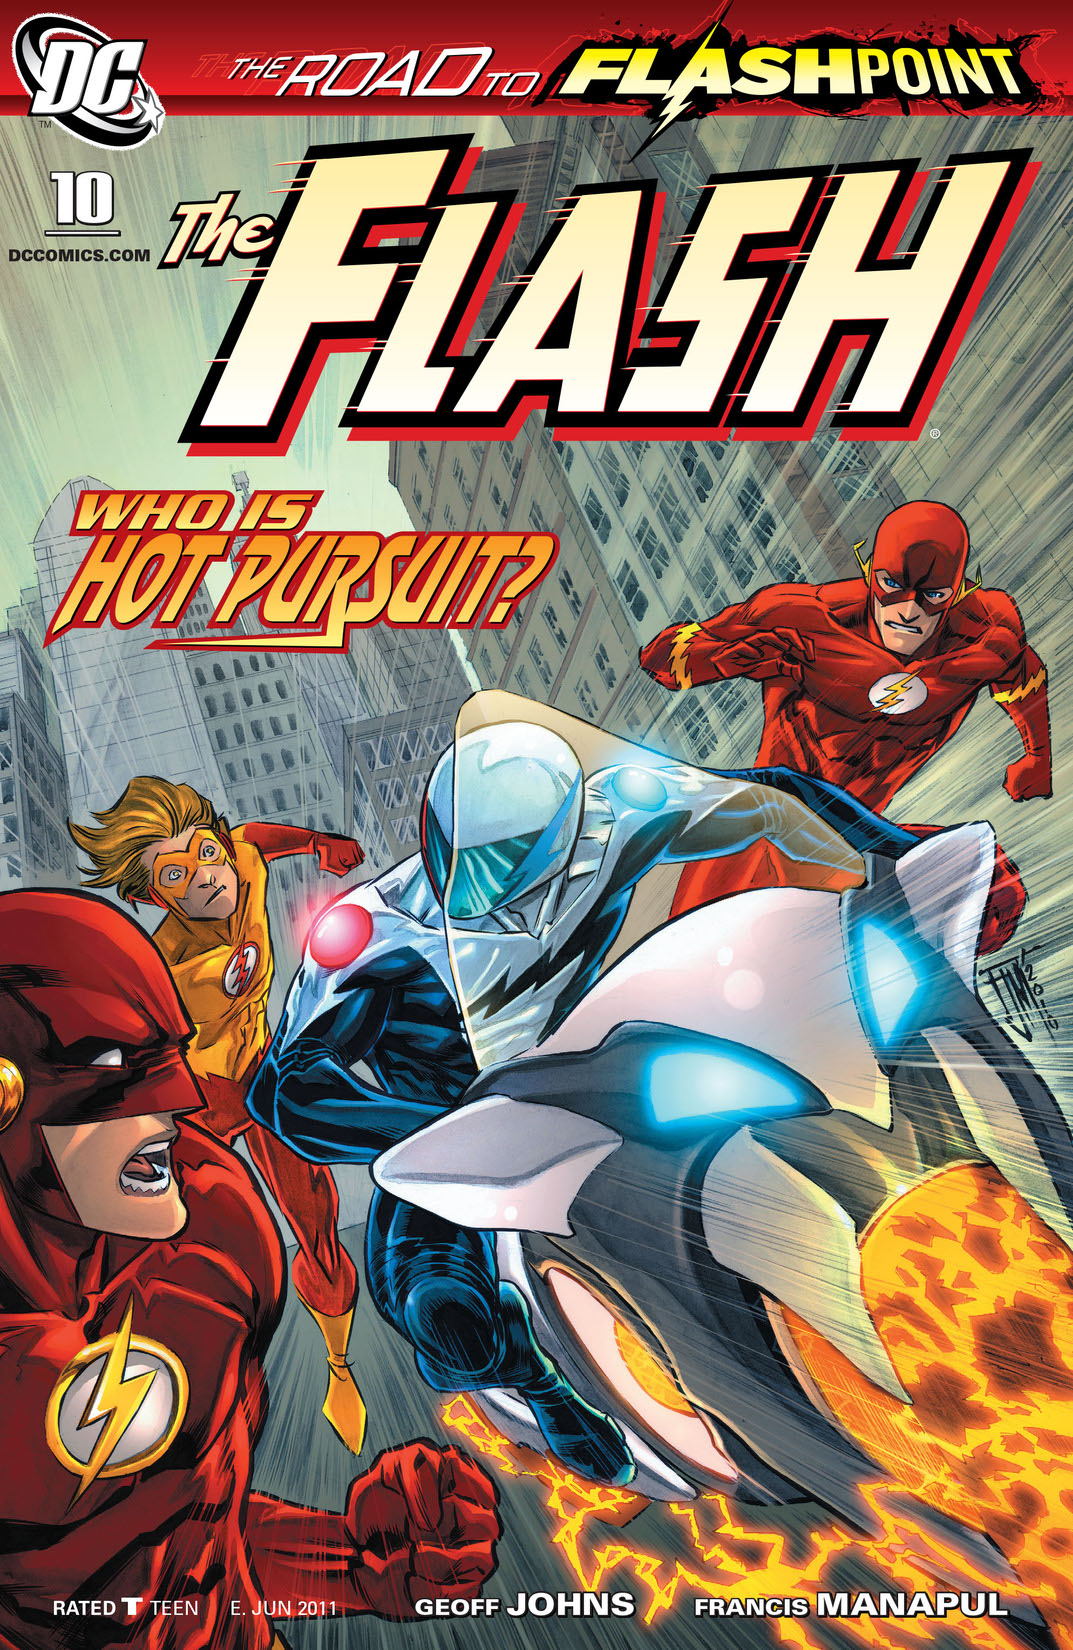 Flash (2010-) #10 preview images